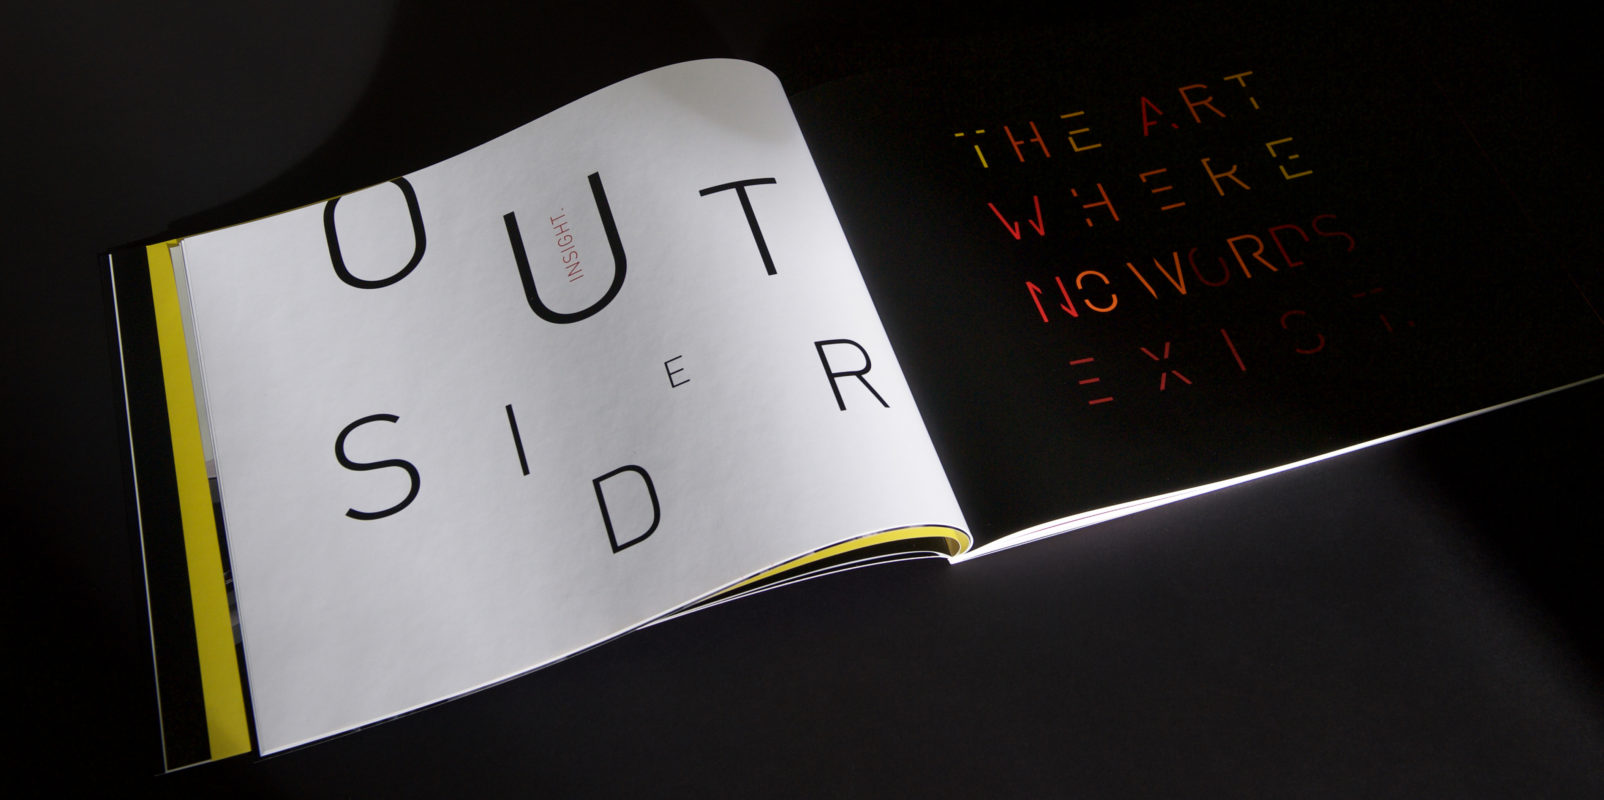 ThisAbility_outsider shows typographic art of the line "Outsiders. Insight."